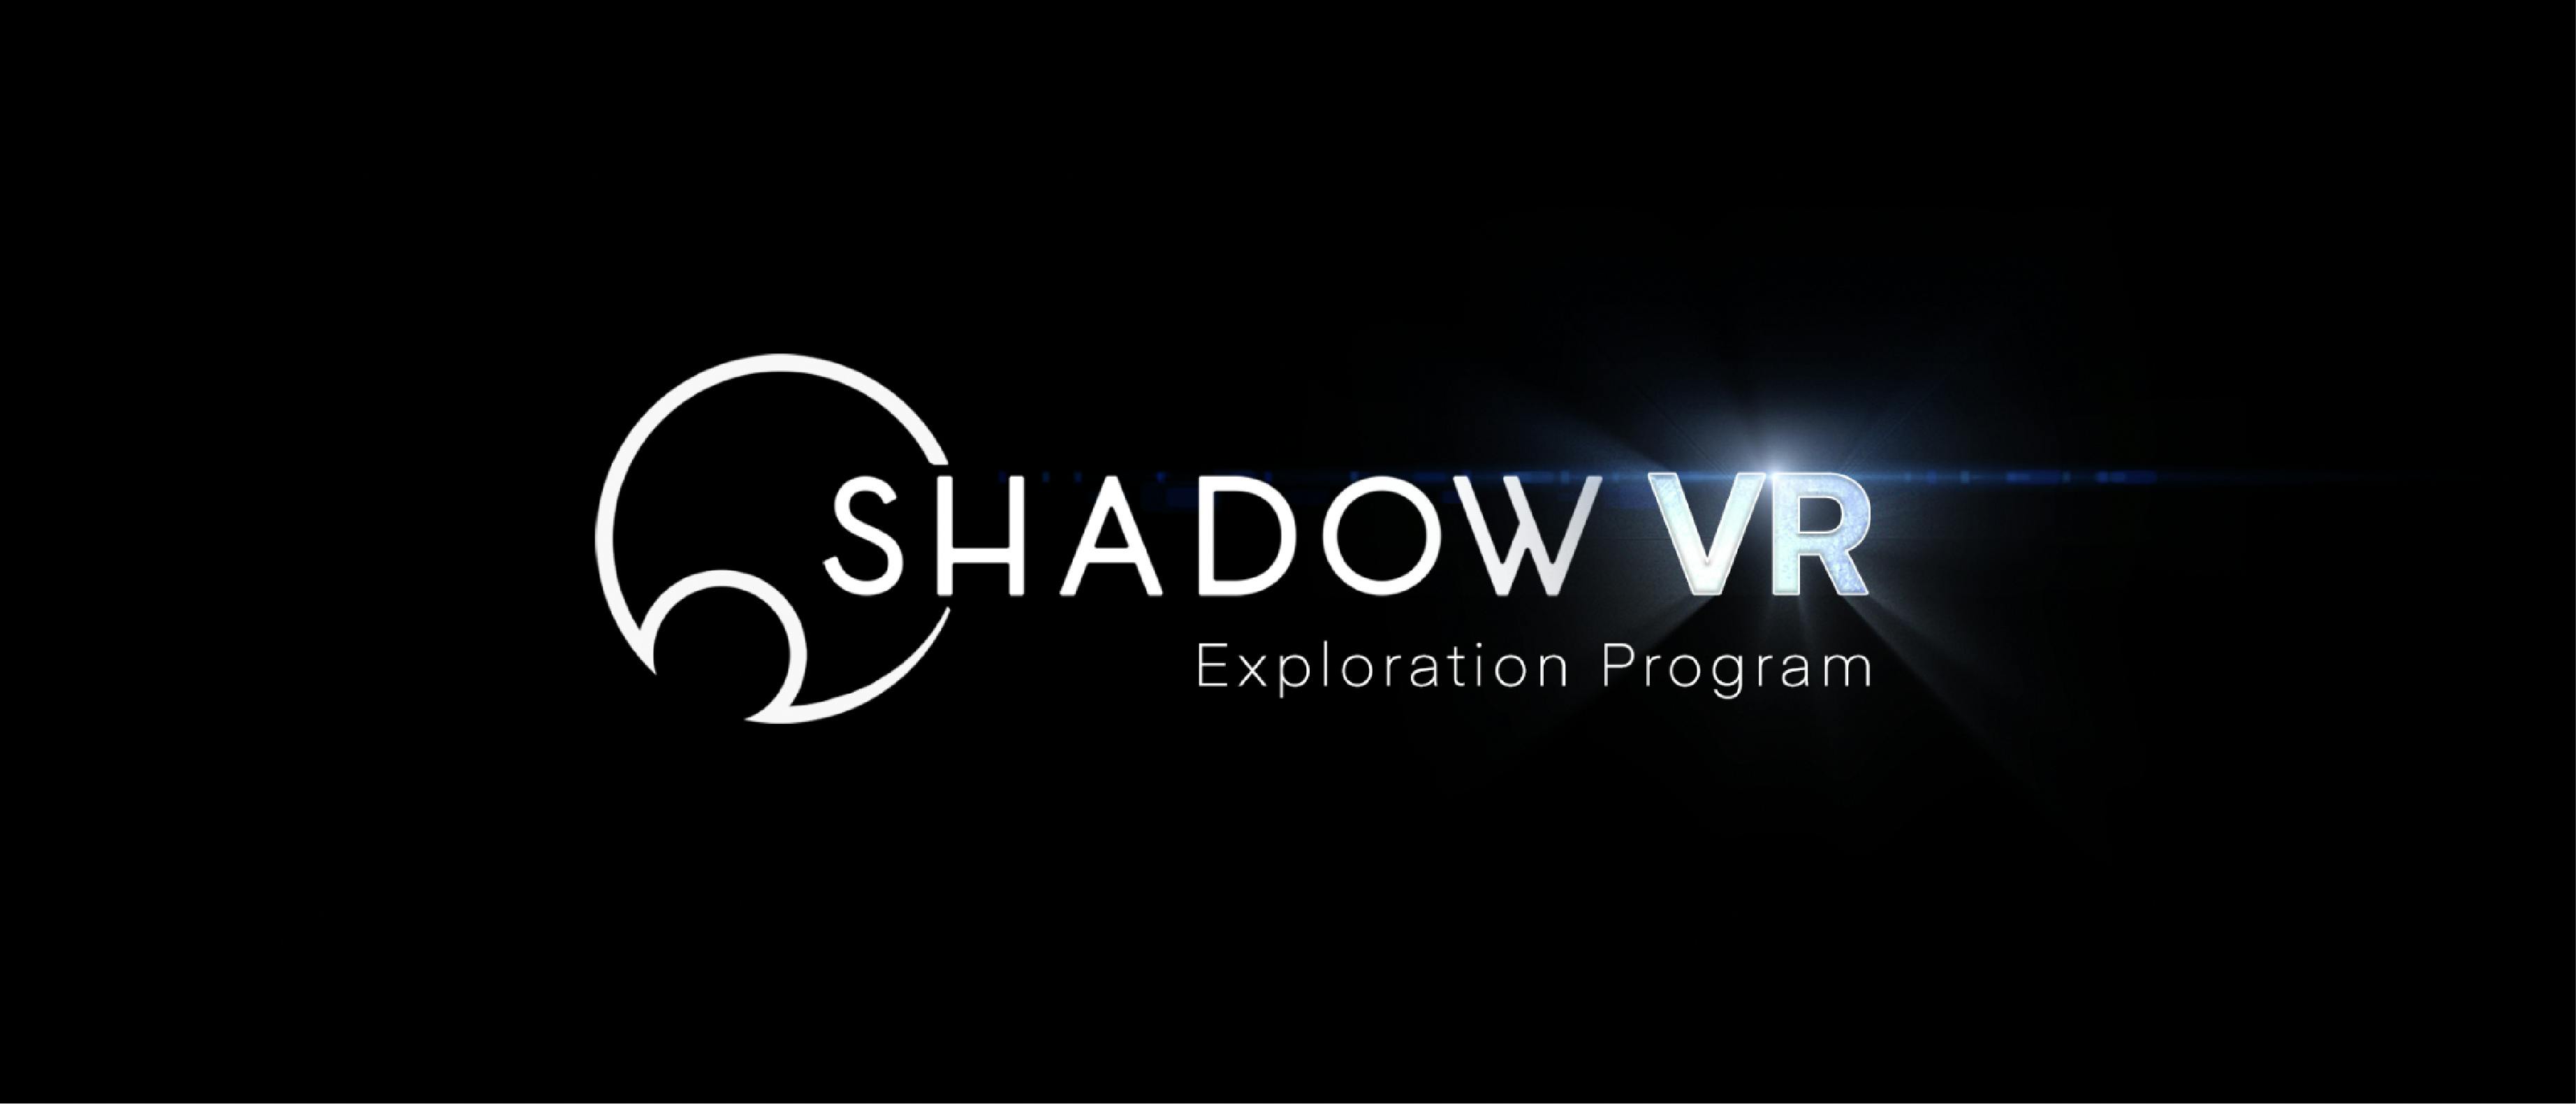 Shadow Introduces Their Newest Venture The Vr Exploration Program